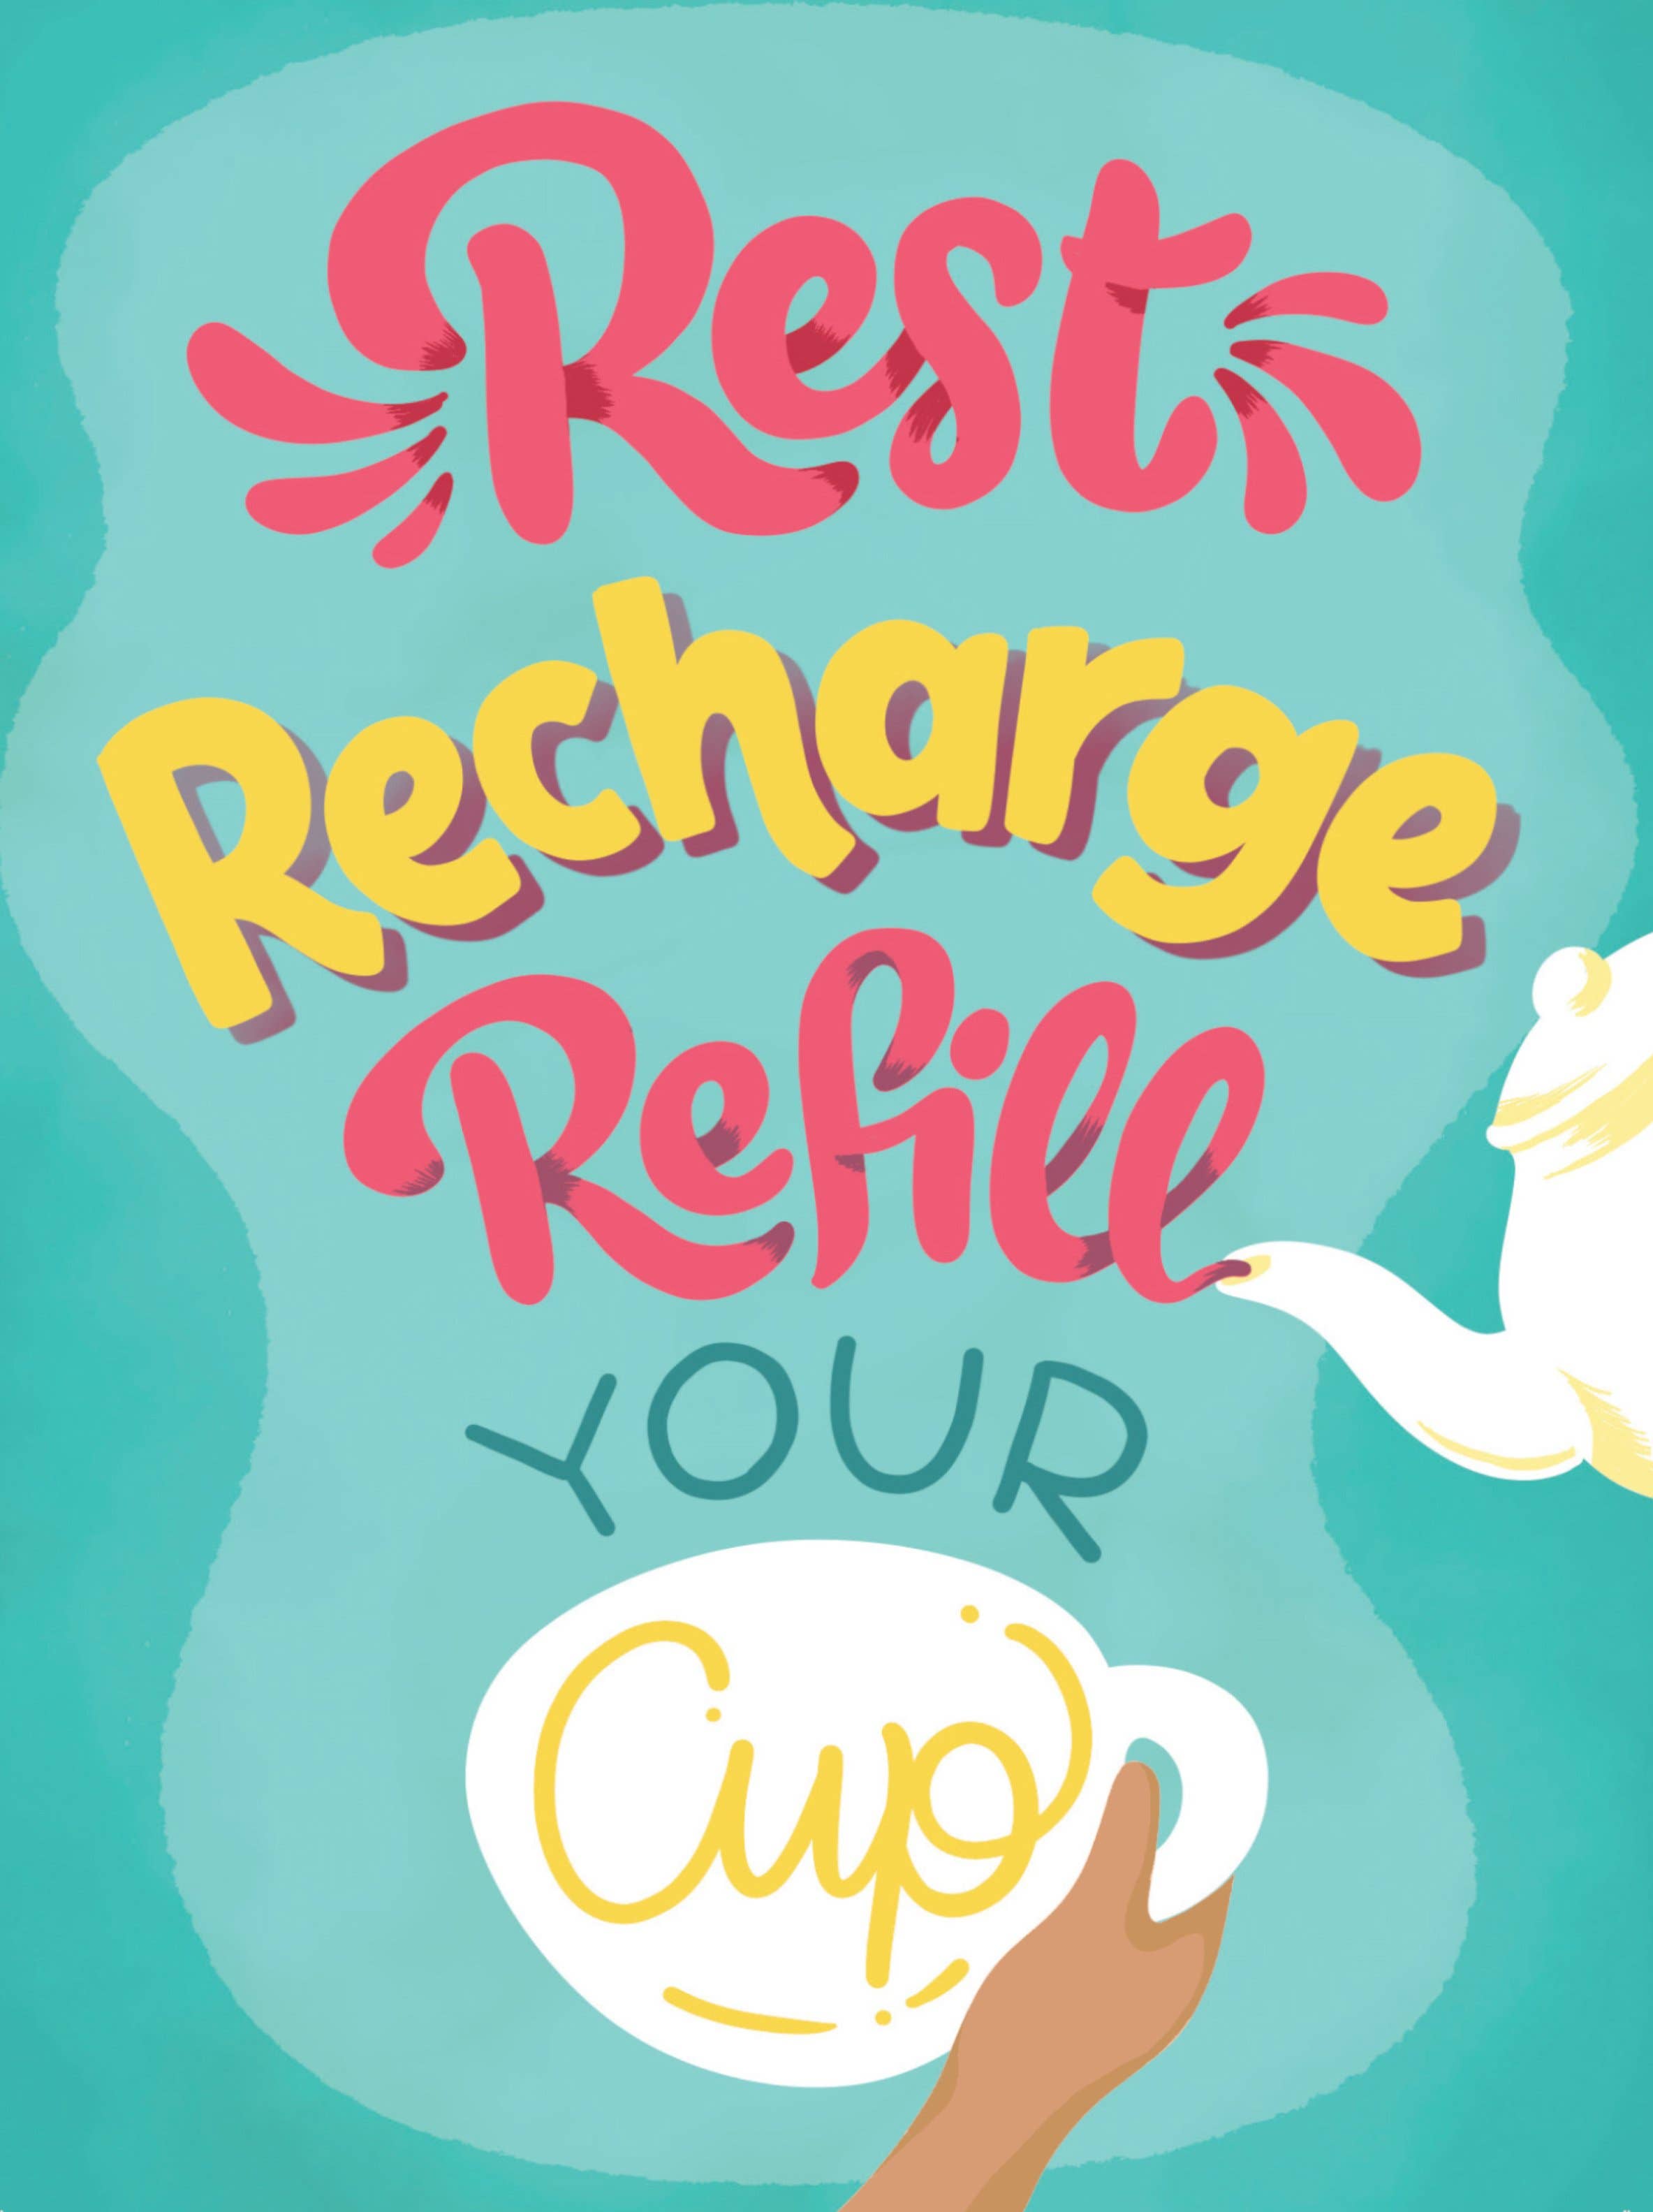 CheerNotes - Rest and Refill - wellness, self care, Black women card